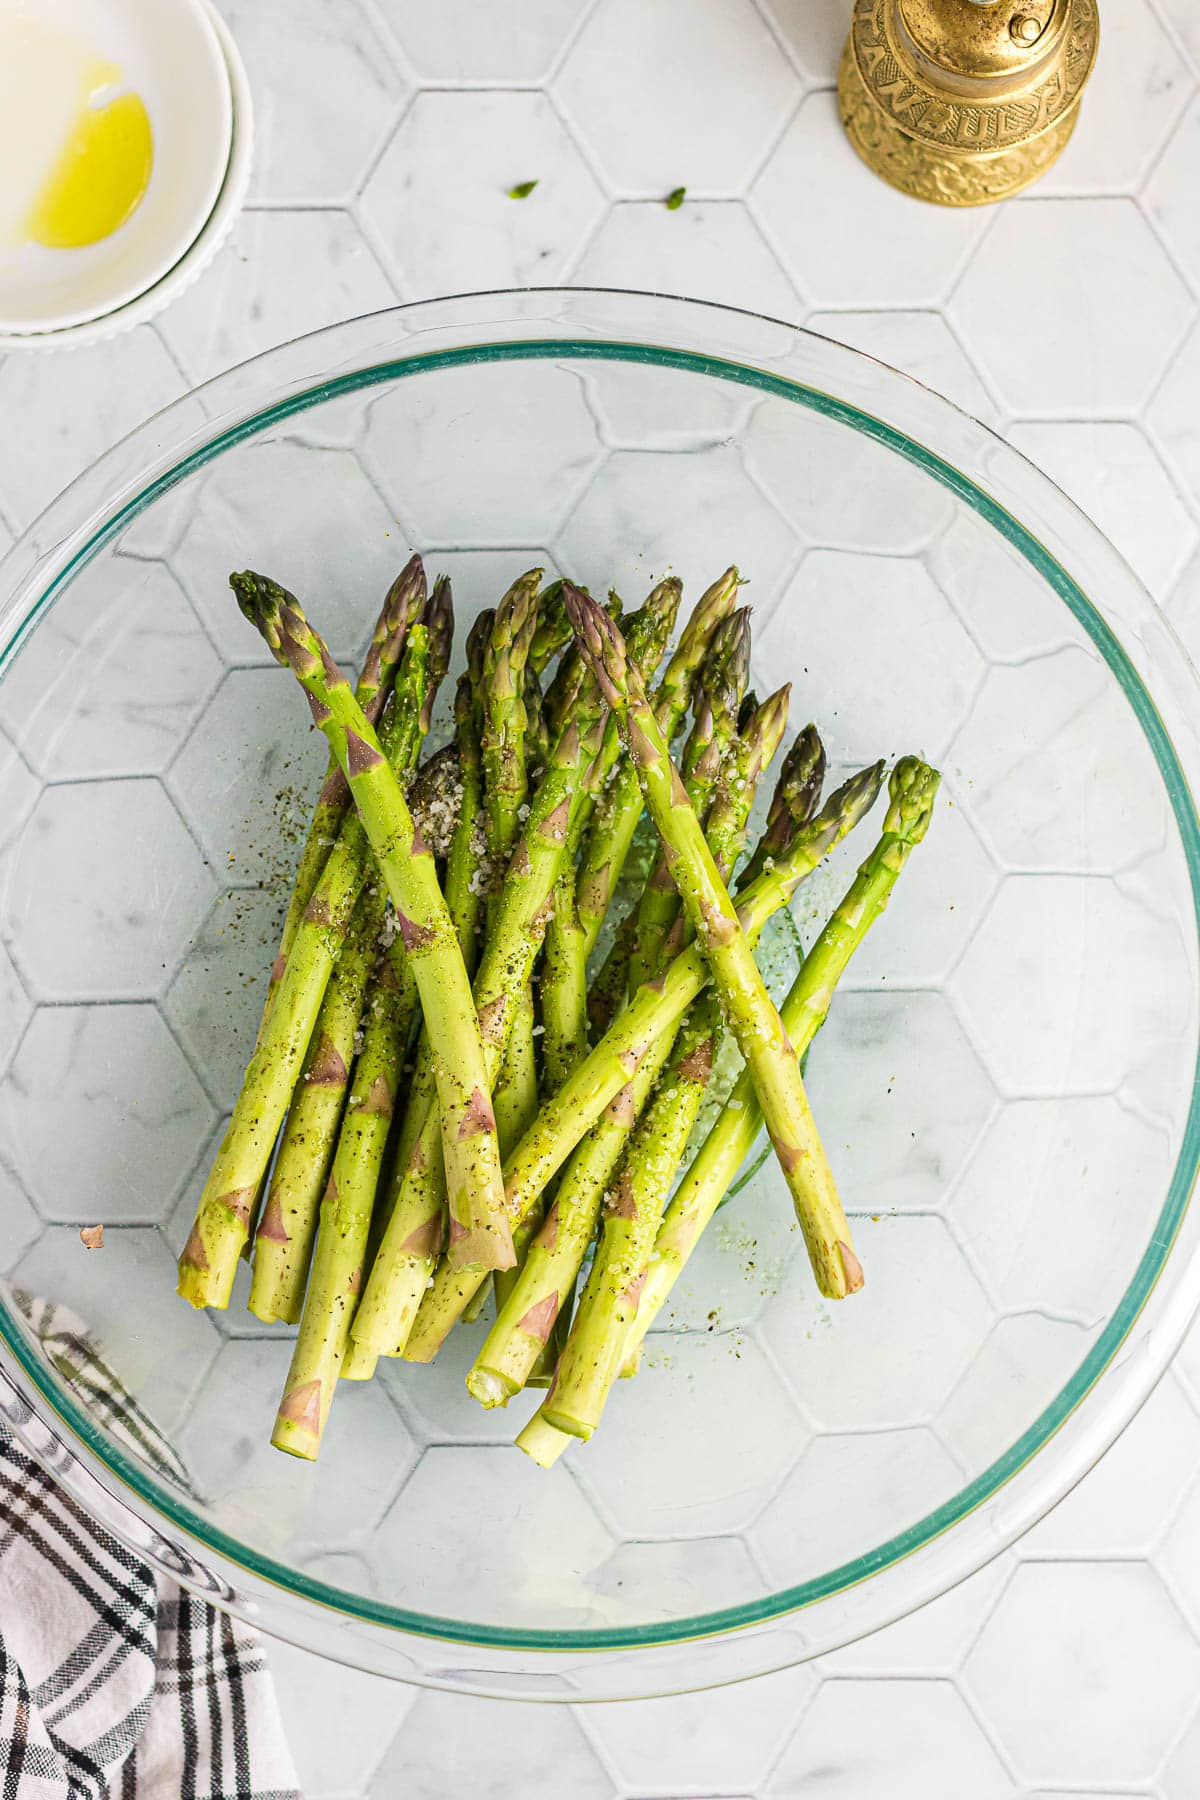 Asparagus drizzled with olive oil in a bowl.